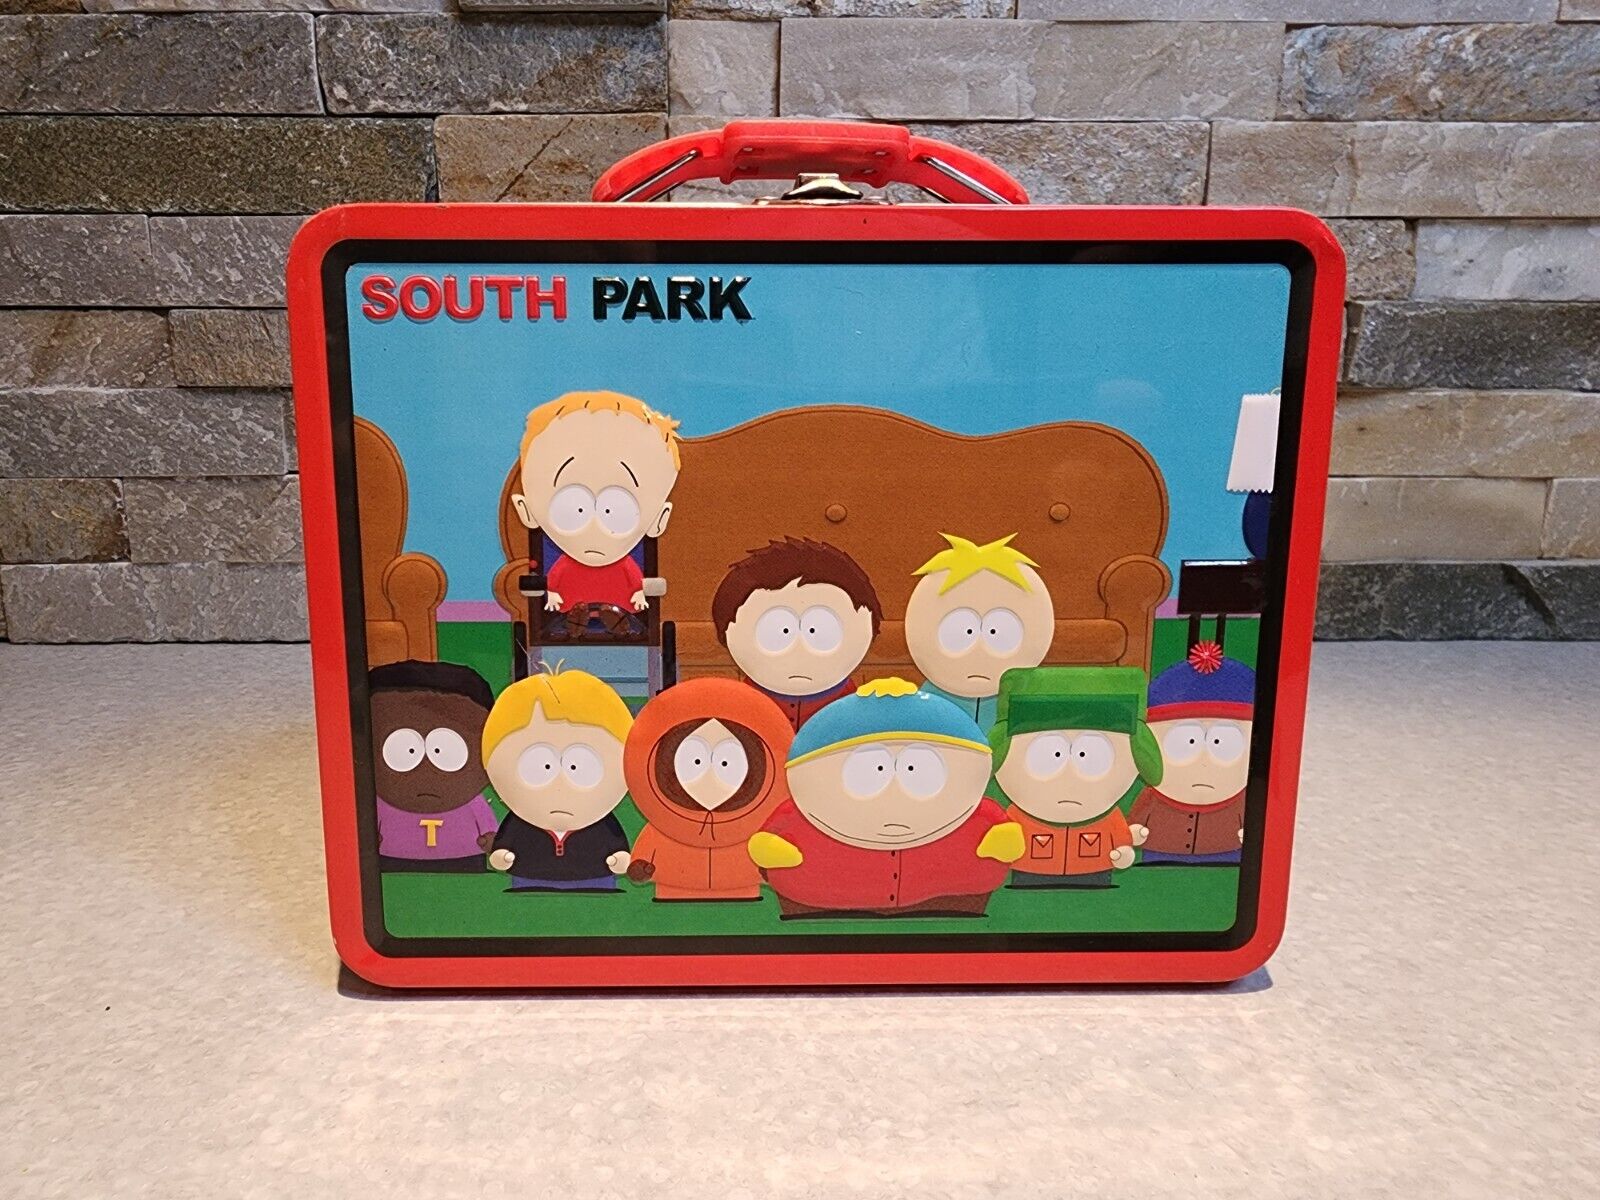 South Park The Gang 2011 Metal Lunch Box from Tin Box Co Comedy Central